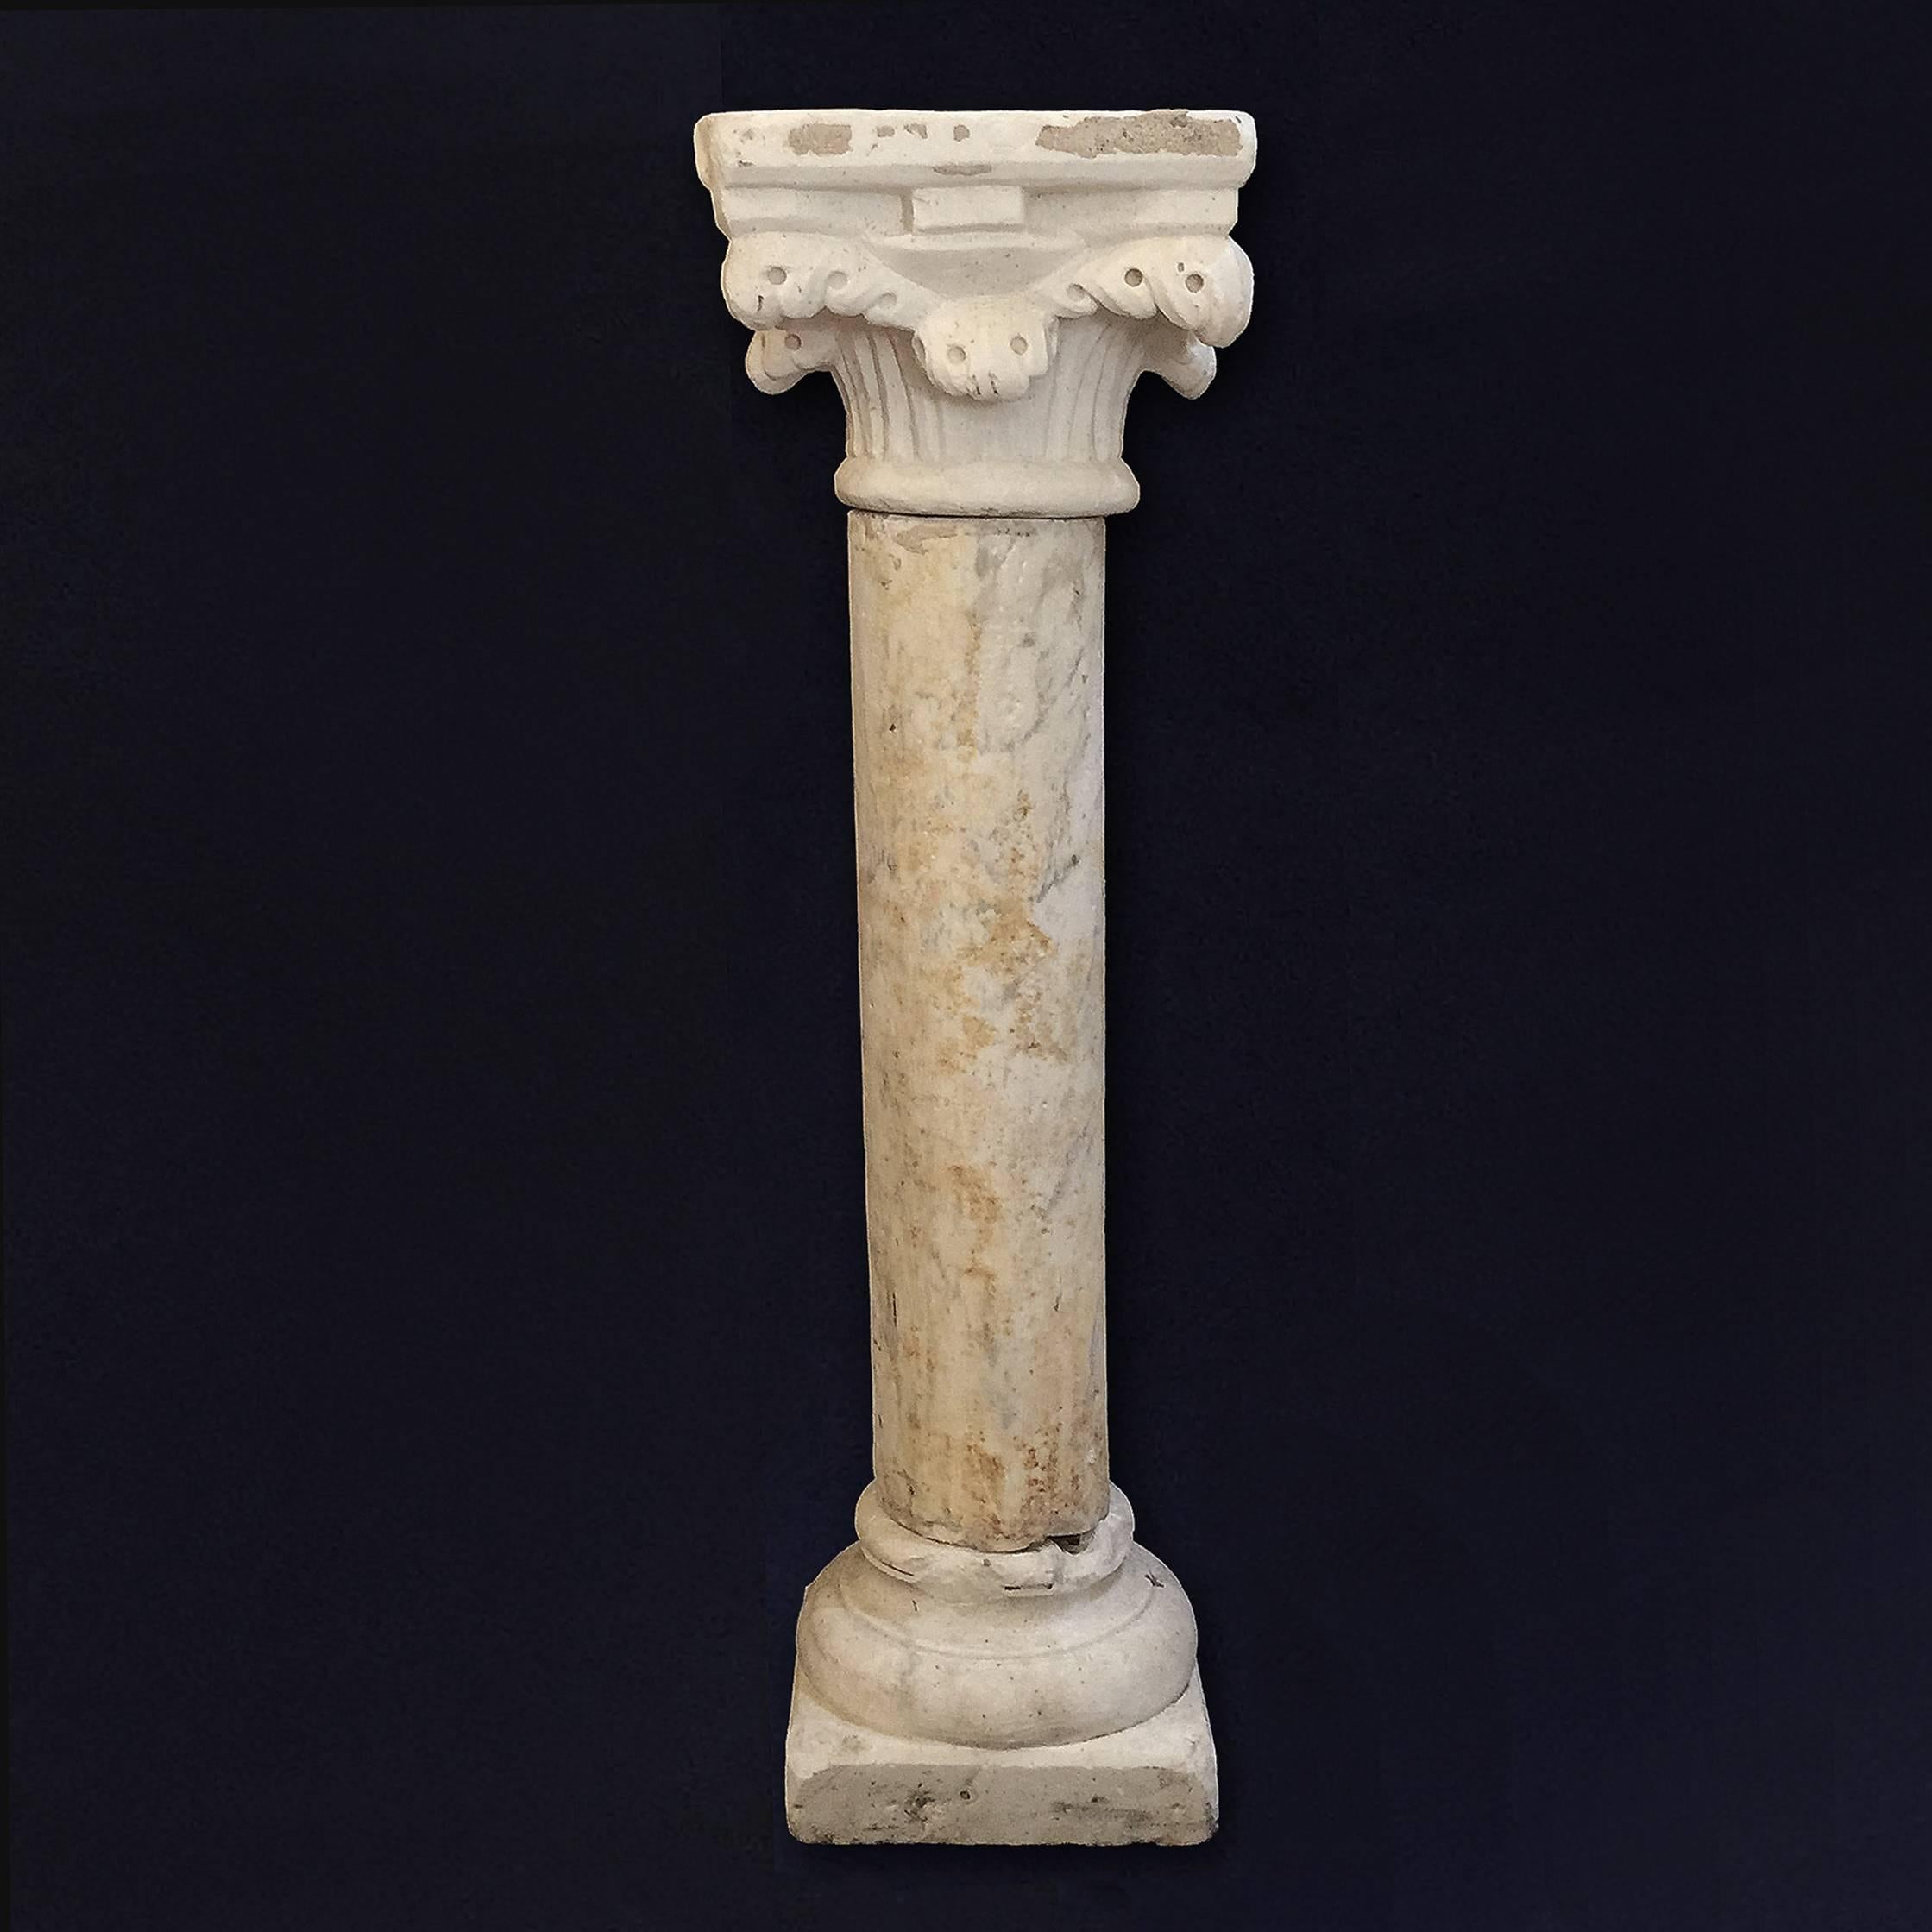 A charming three-piece carved white marble column or pedestal with a beautiful classical capital.
The single marble pieces are connected by a small iron structure.
Beautiful capital inspired by the antiques
Tuscany, late 18th century
Perfect eye